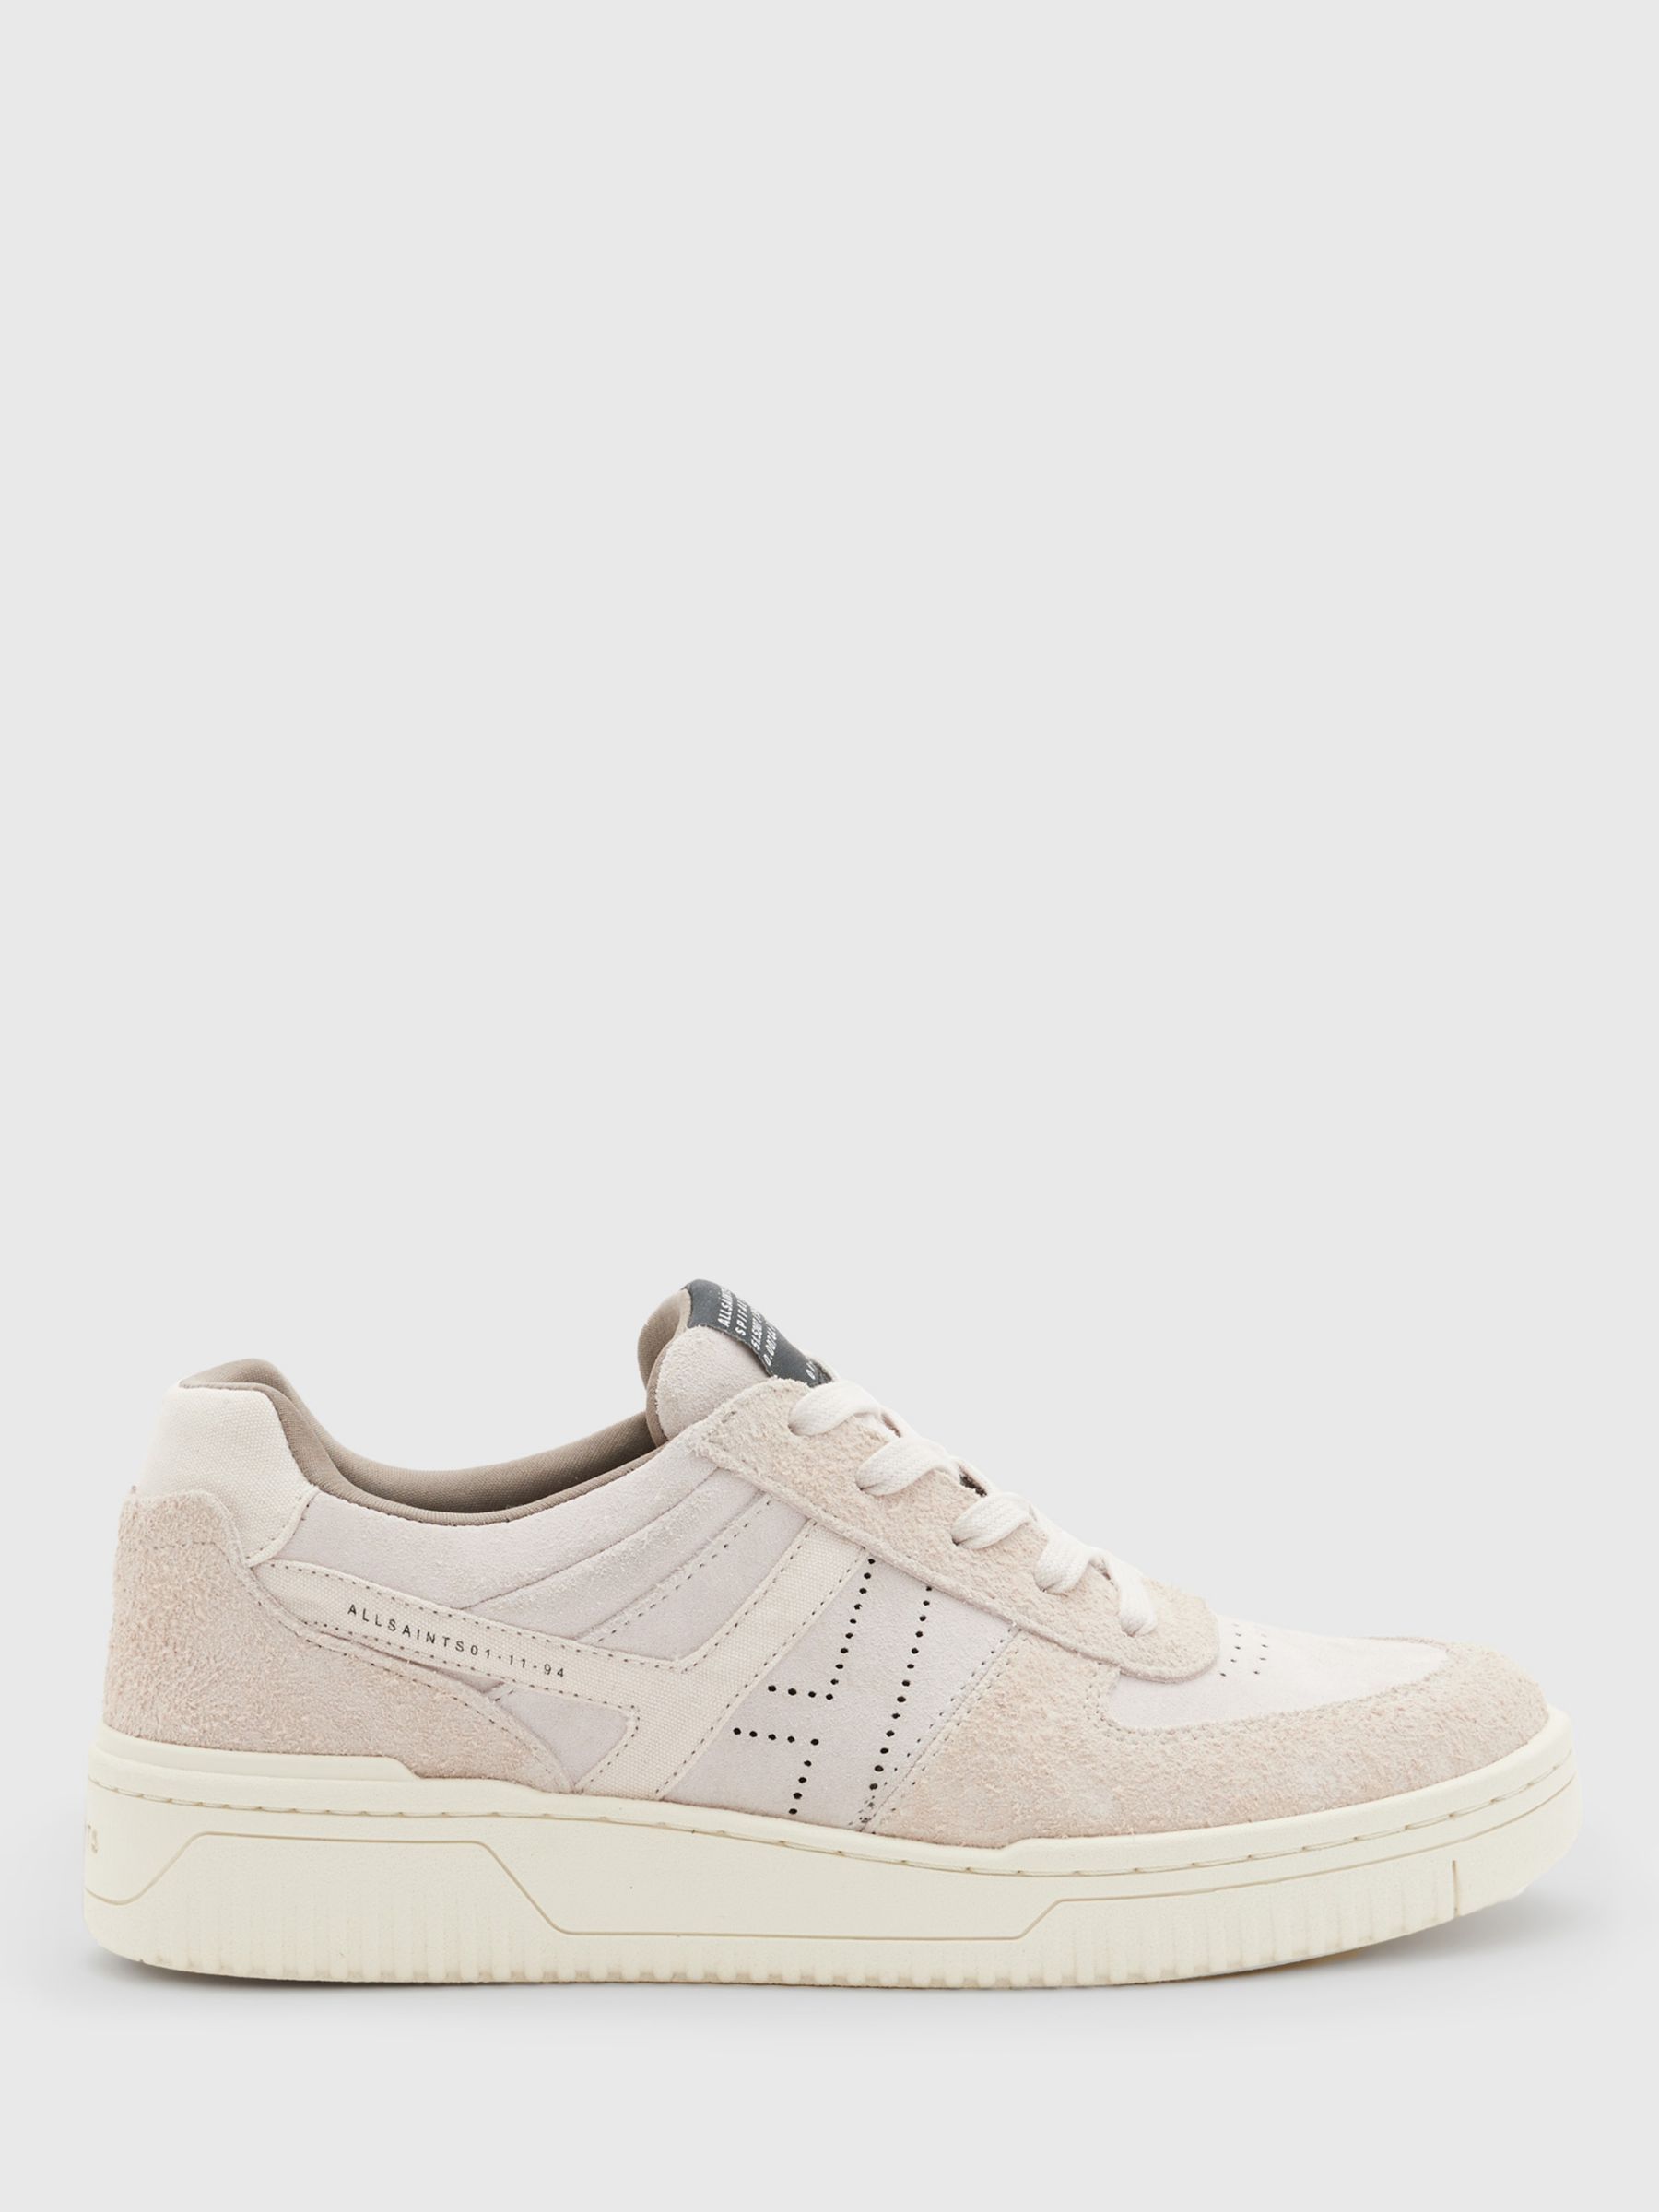 AllSaints Vix Low Top Leather and Suede Trainers, Pale Rose Pink at ...